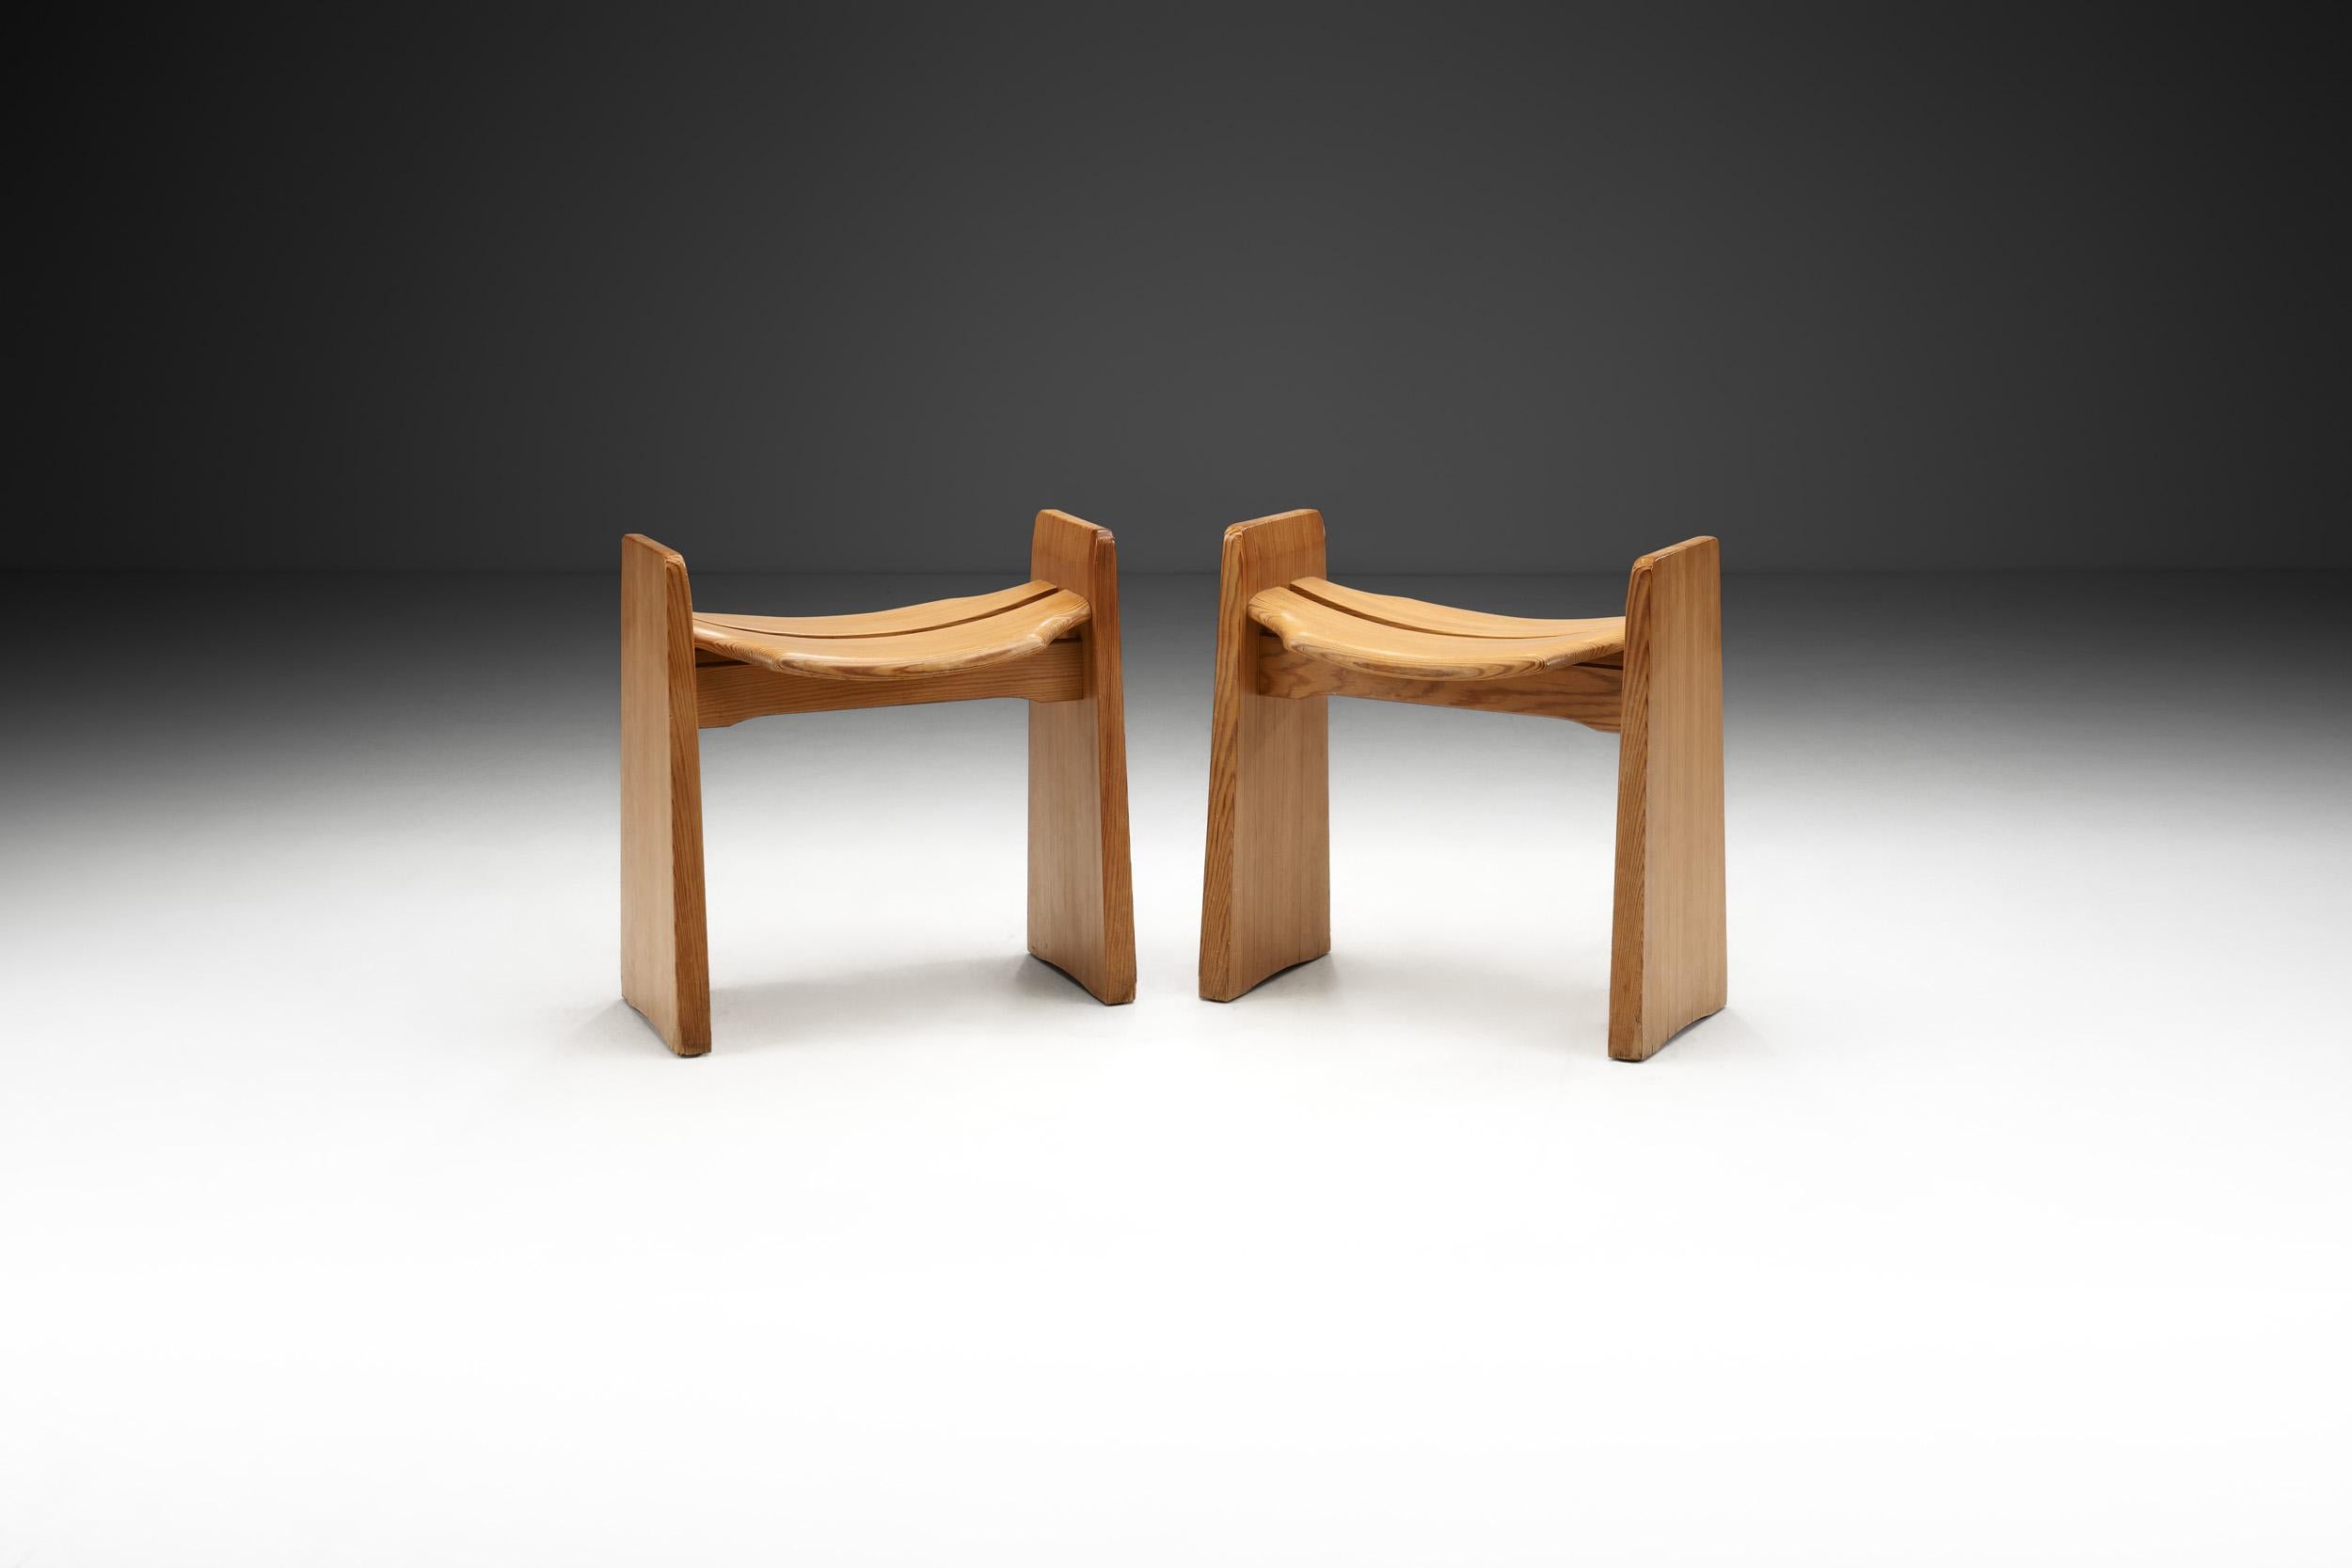 Designed in 1969, these so-called “Jonte” pine stools are the Swedish designer’s signature models. The design is brilliant in its simplicity, merging traditional Swedish craftsmanship with the strong influences of the modernist movement that swept